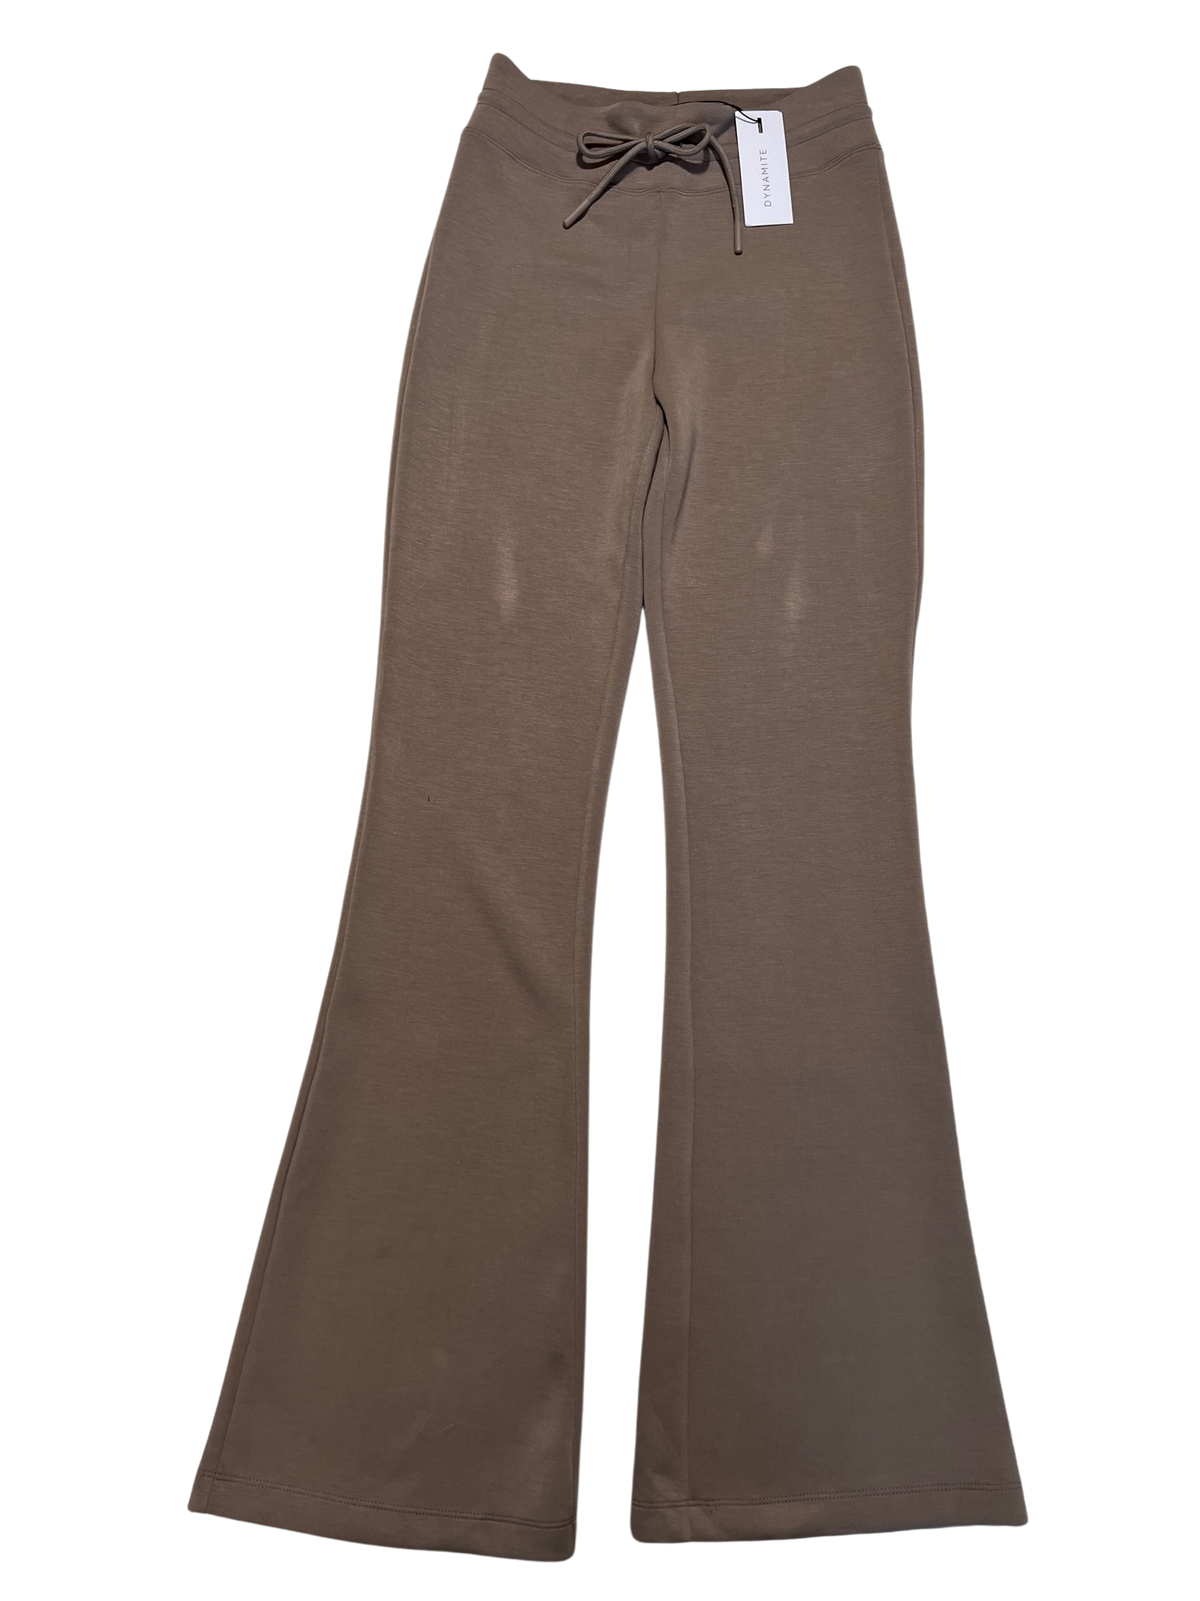 Dynamite- Brown Cargo Joggers NEW WITH TAGS!